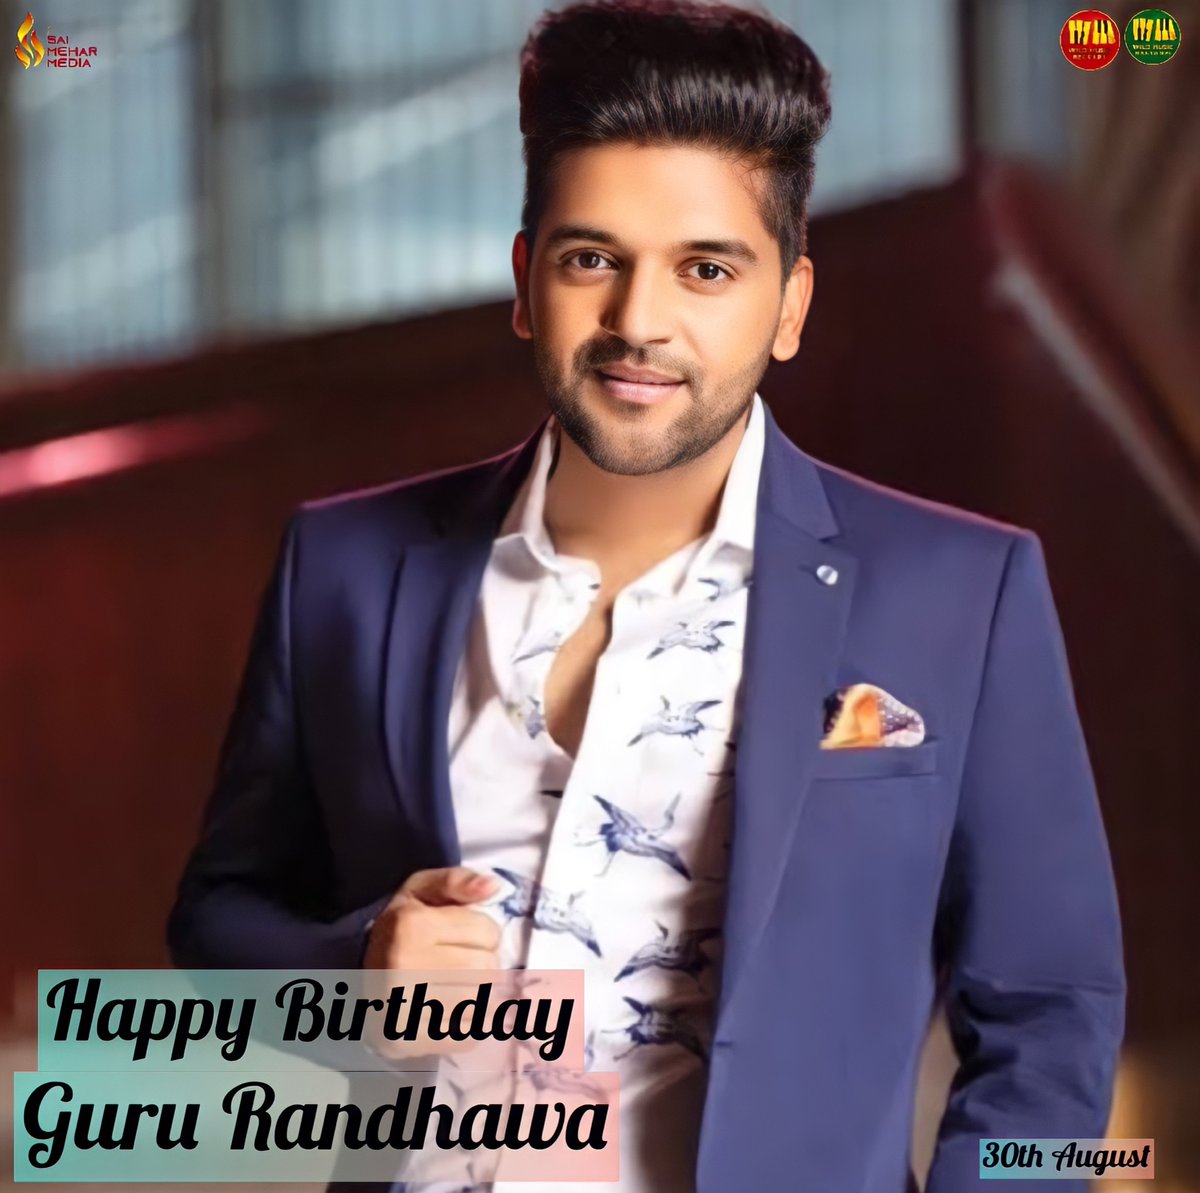 We wish the gabru singer a rocking birthday. From suit to punjabia di dhee. He has made everyone dance on his tunes. Happiest Birthday @GuruOfficial 

#music #singer #songs #musicvideo #newpost #reels #indianreels #reelsinstagram #instagram #instareels #musicislife #life